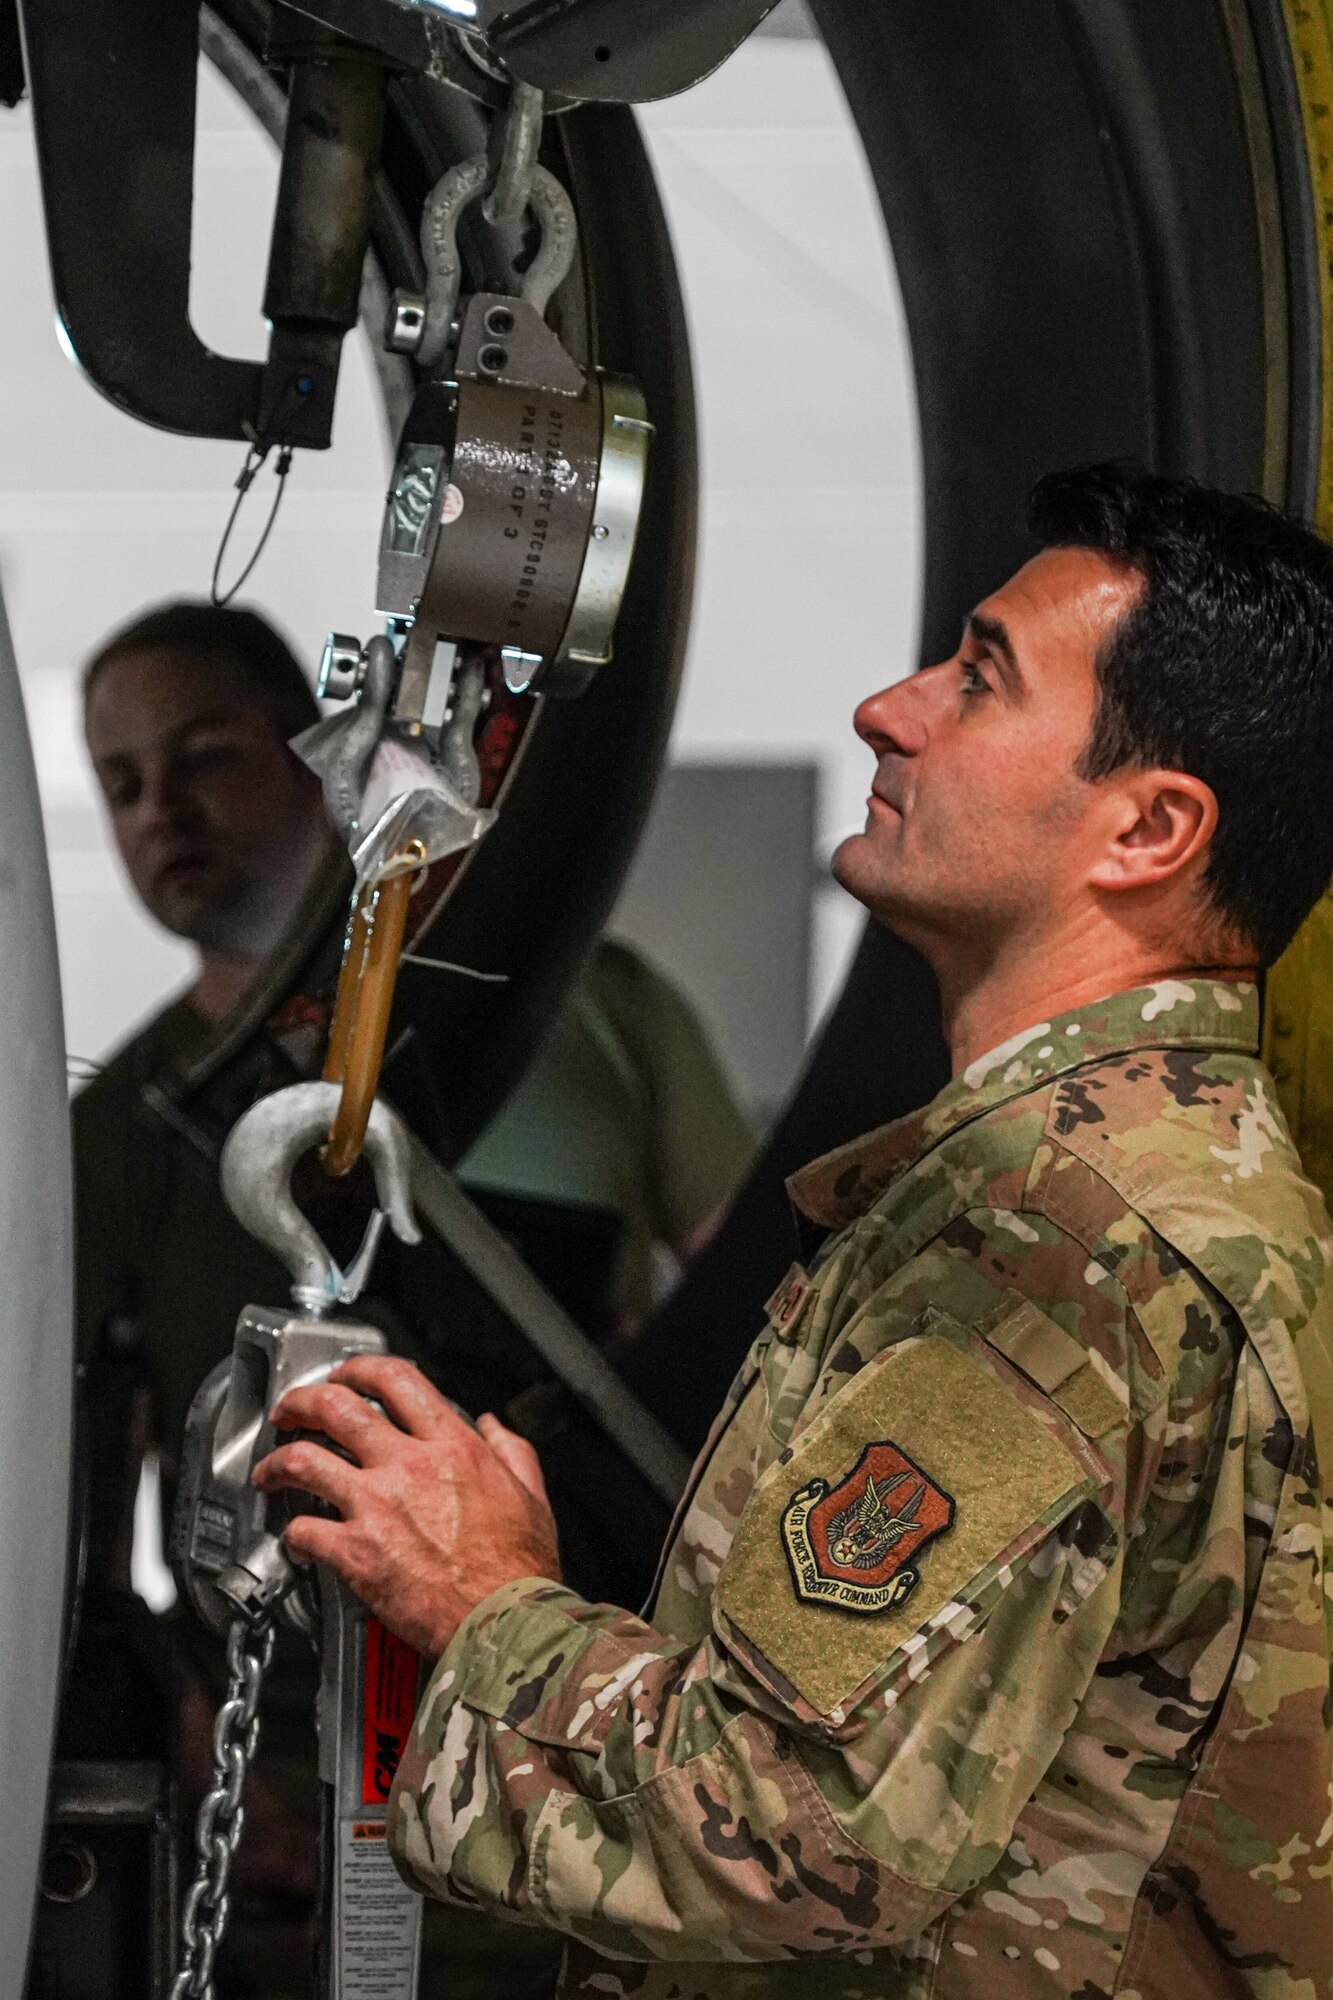 Tech. Sgt. Thomas Carozzolo, an aerospace propulsion specialist assigned to the 914th Aircraft Maintenance Squadron at Niagara Falls Air Reserve Station, New York, carefully watches a weight gauge attached to a KC-135 Stratotanker engine on Oct. 18, 2022. While lifting the engine into place, its weight must be carefully distributed across the engine to ensure it's properly installed. (U.S. Air Force photo by 1st Lt. Lucas Morrow)